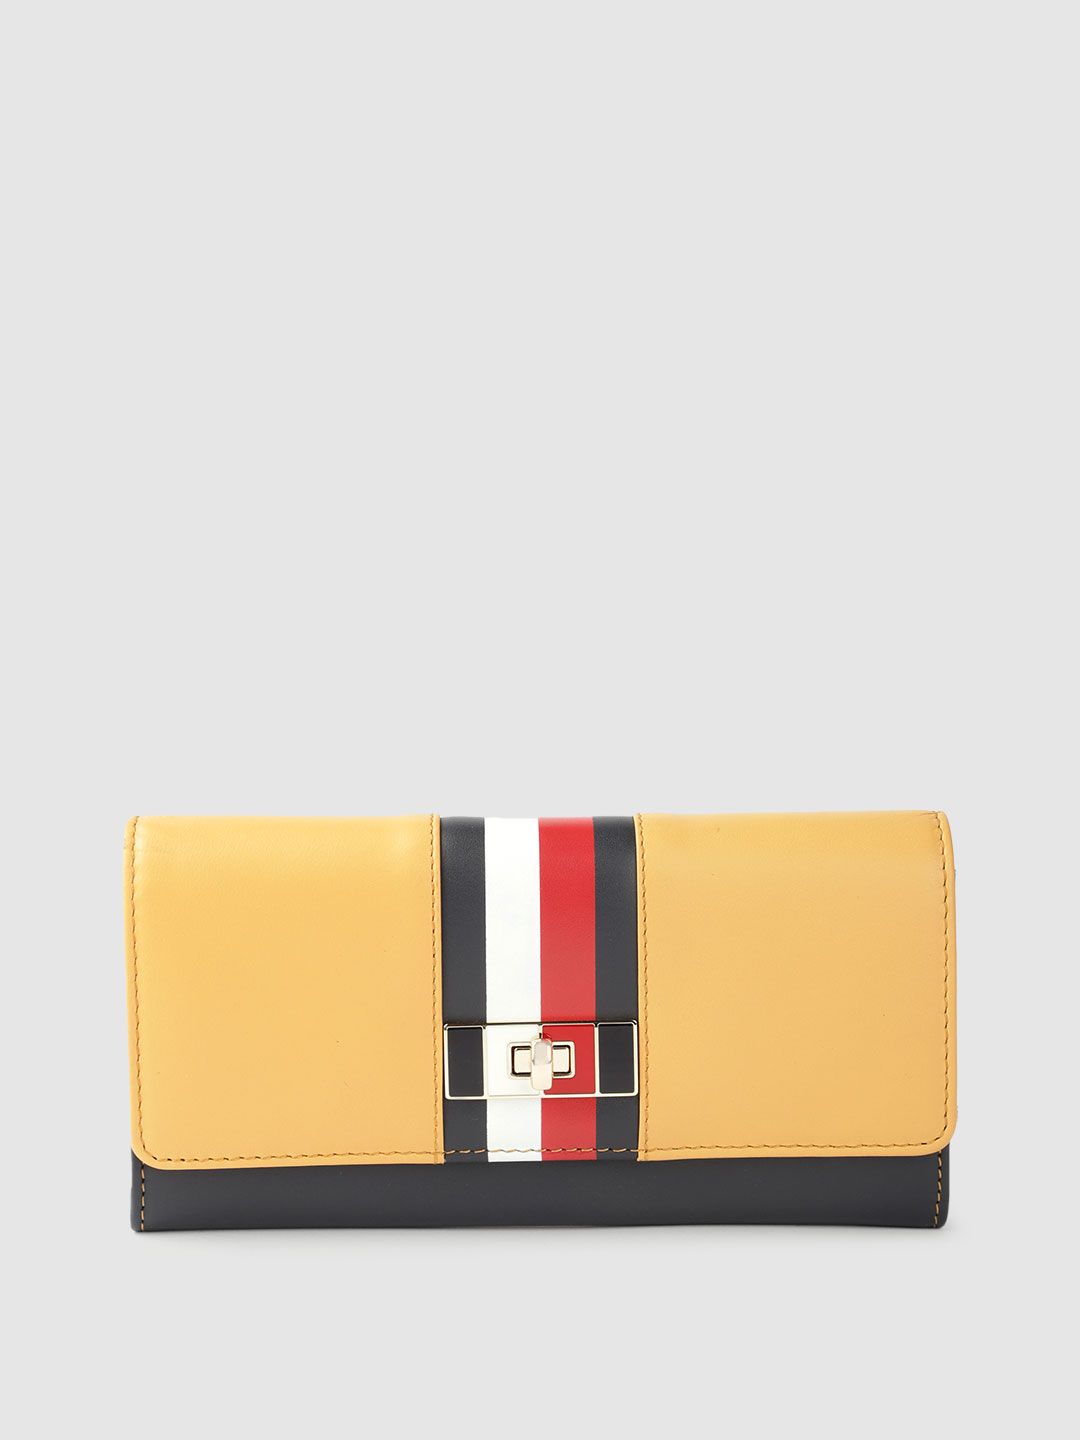 Tommy Hilfiger Women Yellow & Navy Blue Embellished Leather Two Fold Wallet Price in India